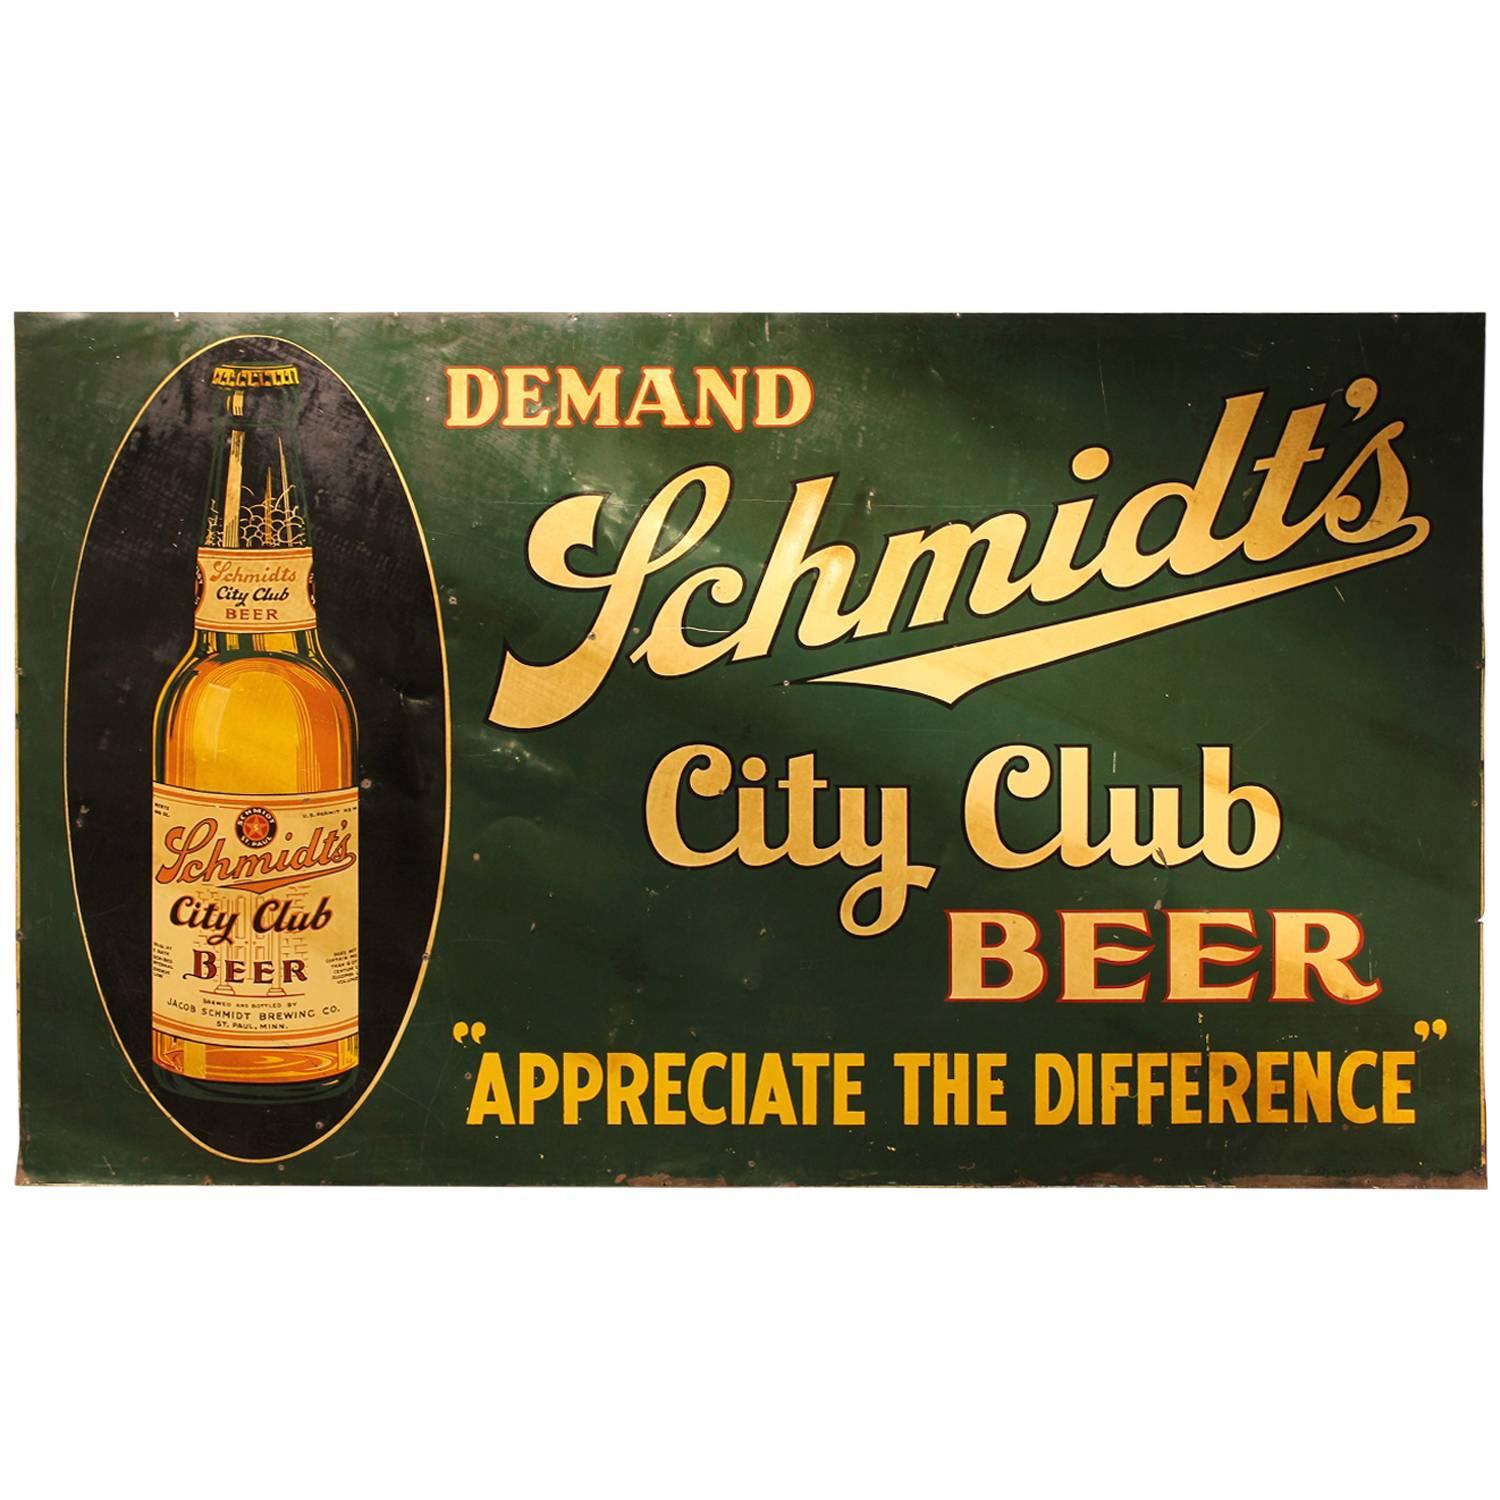 Large 1930s American Tin Advertising Sign "City Club Beer"